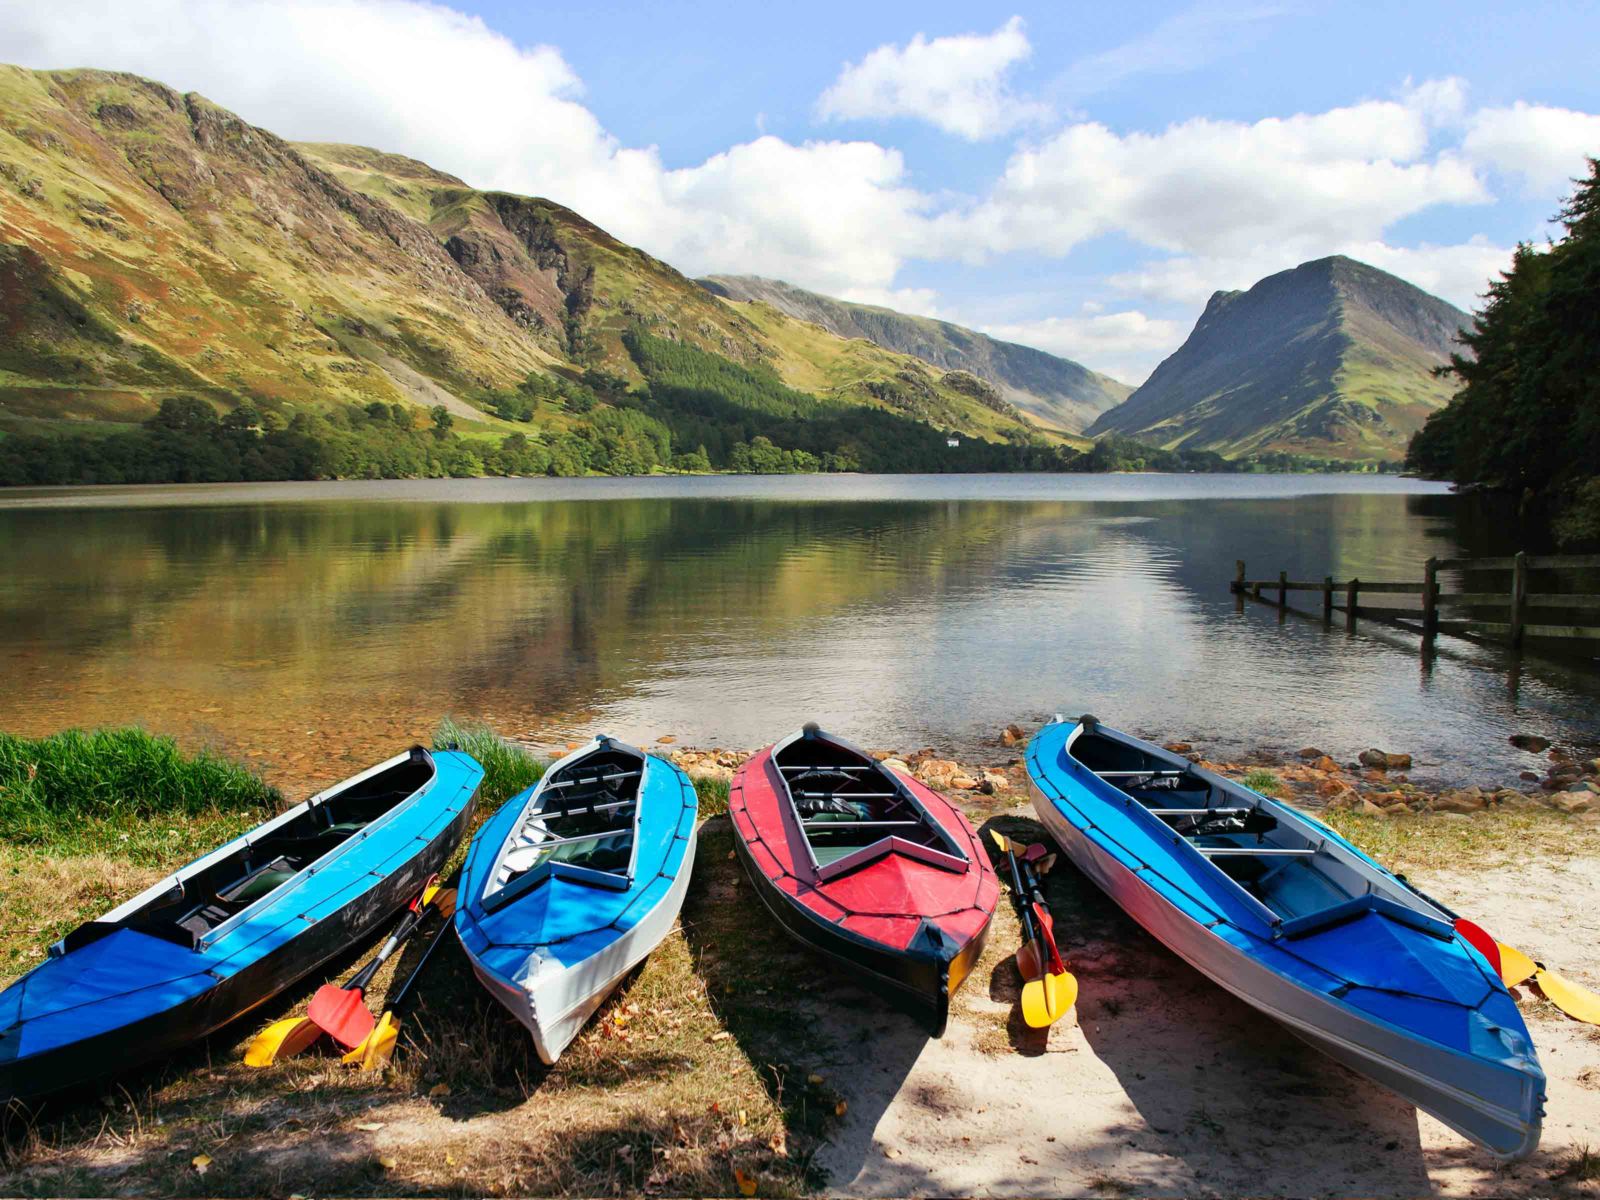 Canoeing for Groups in the Lake District